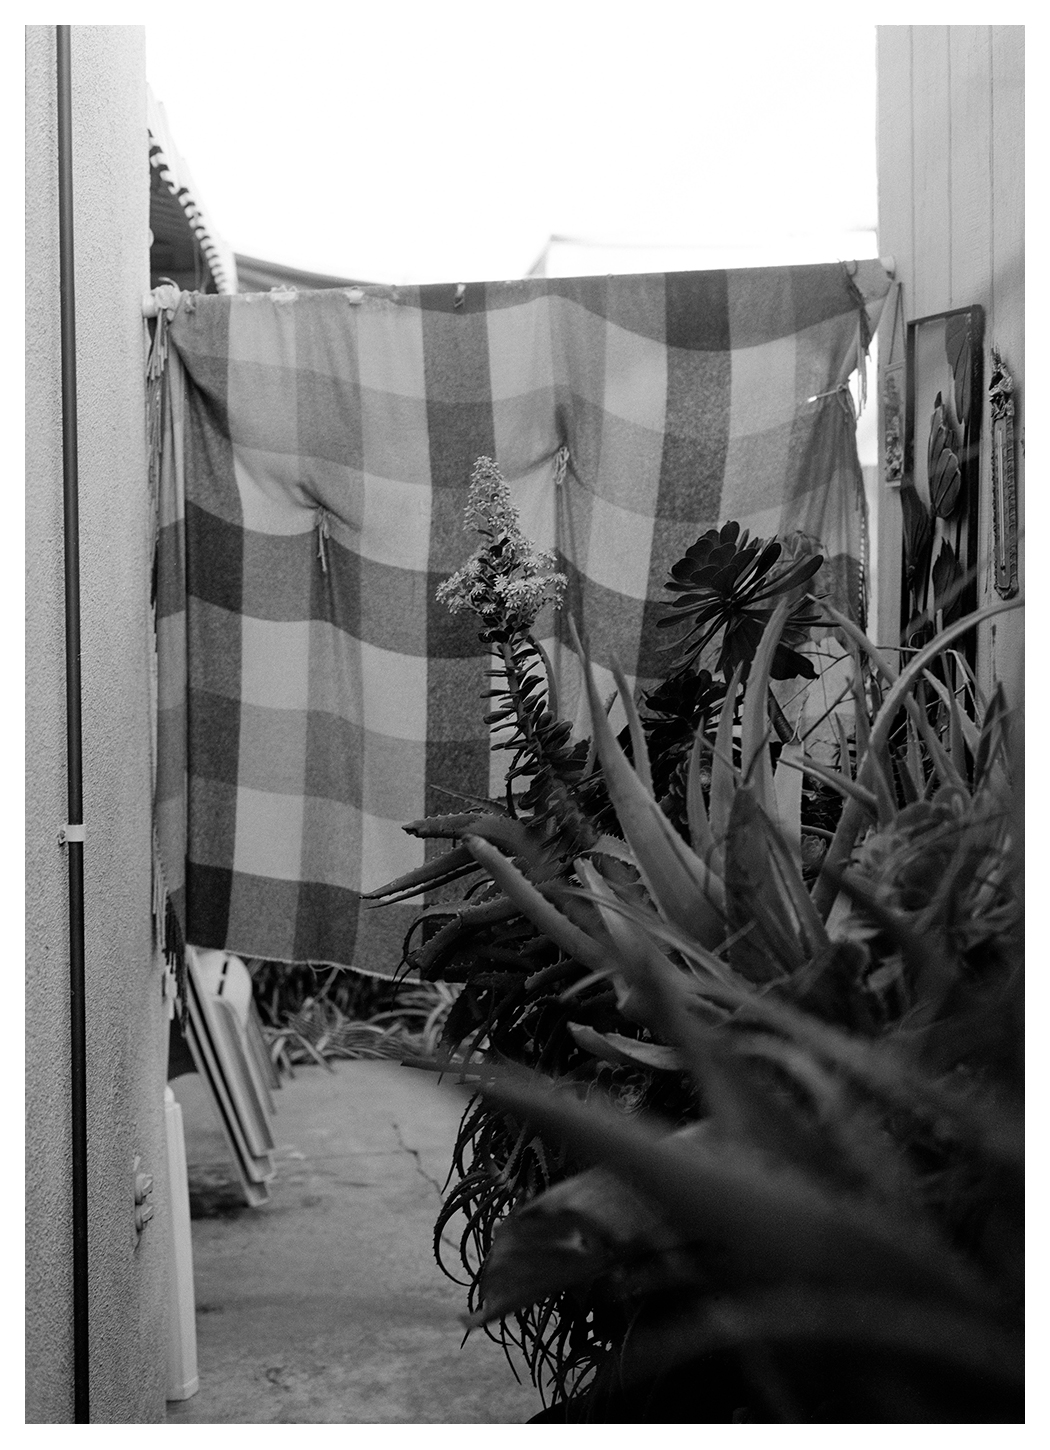 A black-and white photo of what looks like an alleyway or open-air corridor. There is a checkered sheet hanging at the end of the corridor, and at its top and bottom we see a stucco roof and the ground, with one crack running down its center. In the foreground are several aloe plants, spiky leaves taking up the majority of the picture.